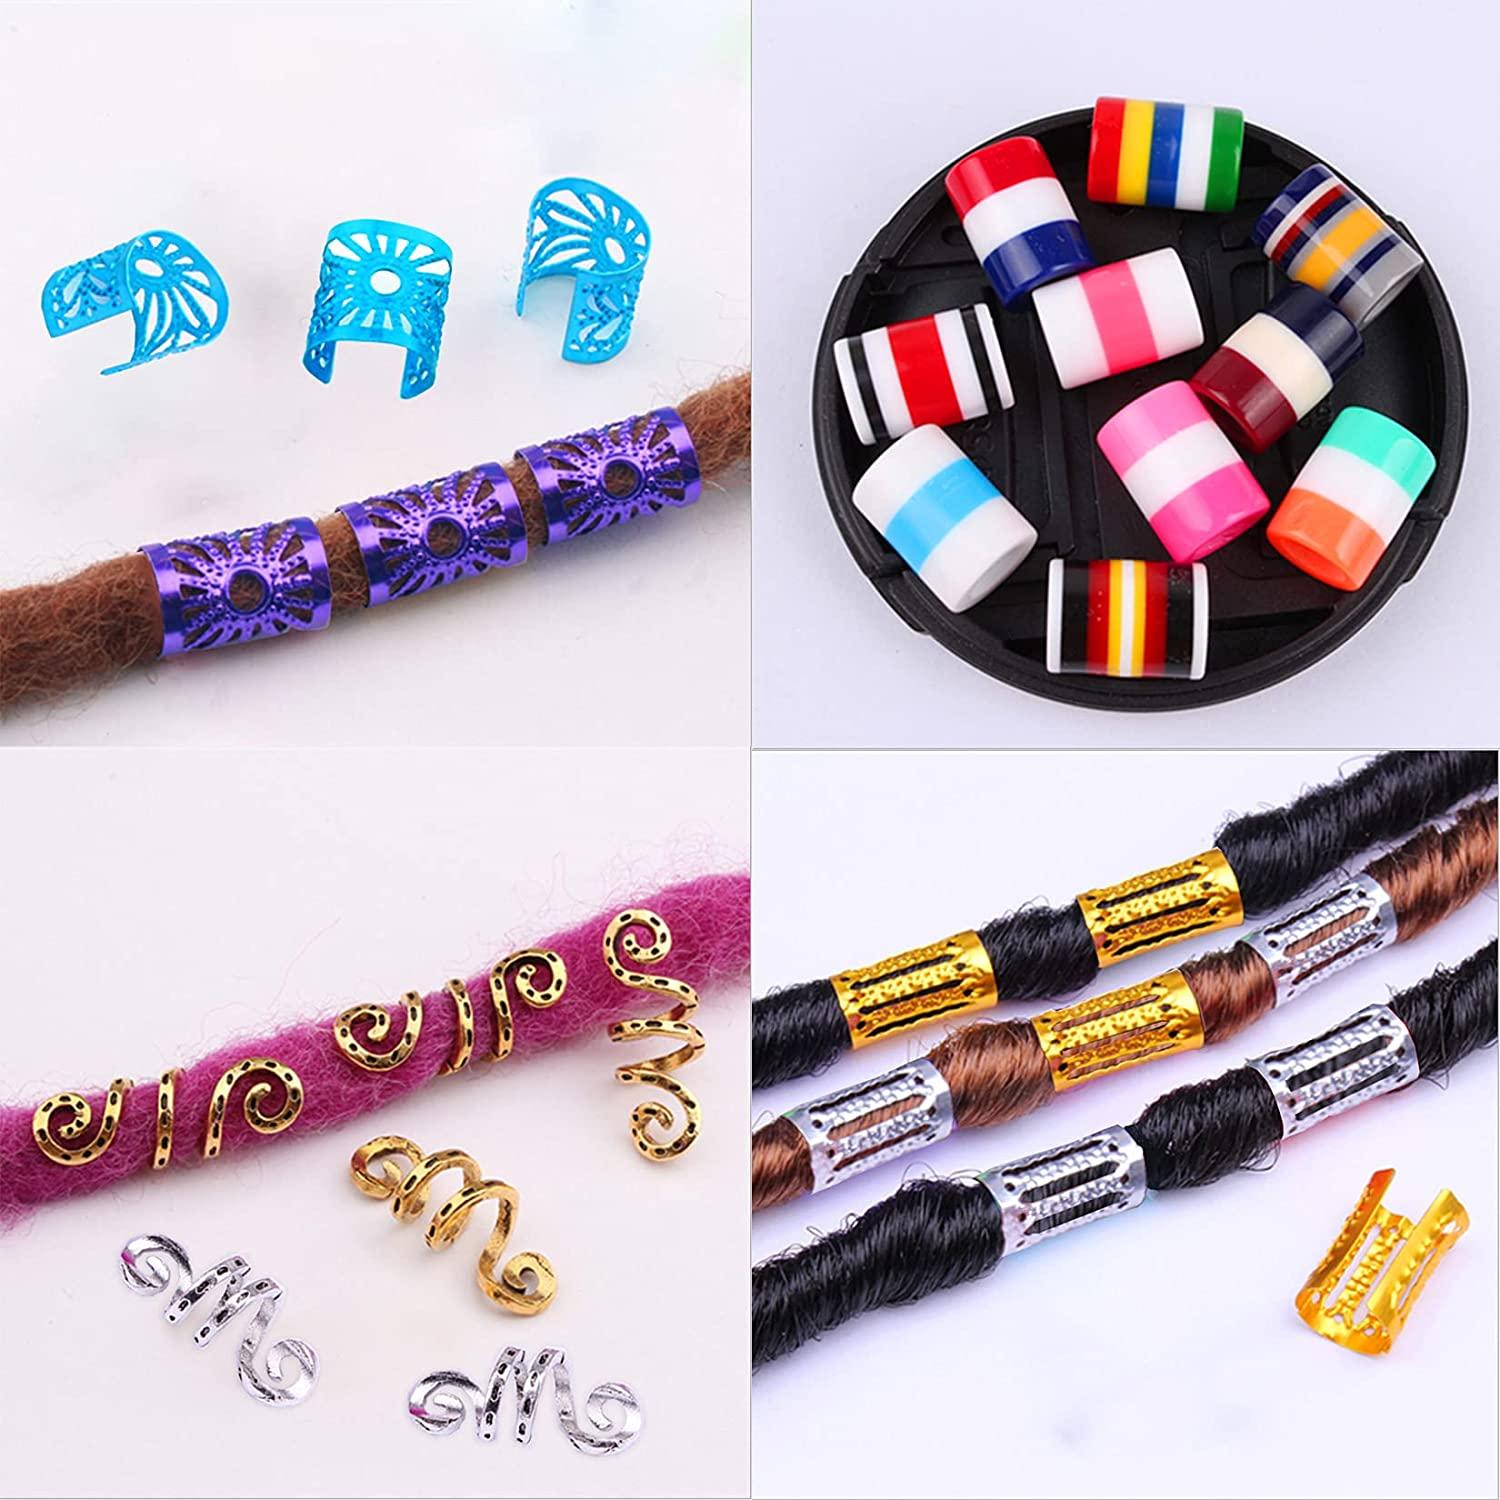 Fabric Dreadlock Bead Tubes Dreadlock Beads Hair Accessories Braid For Hair  24 Pieces Variety Style (MIX COLORS)